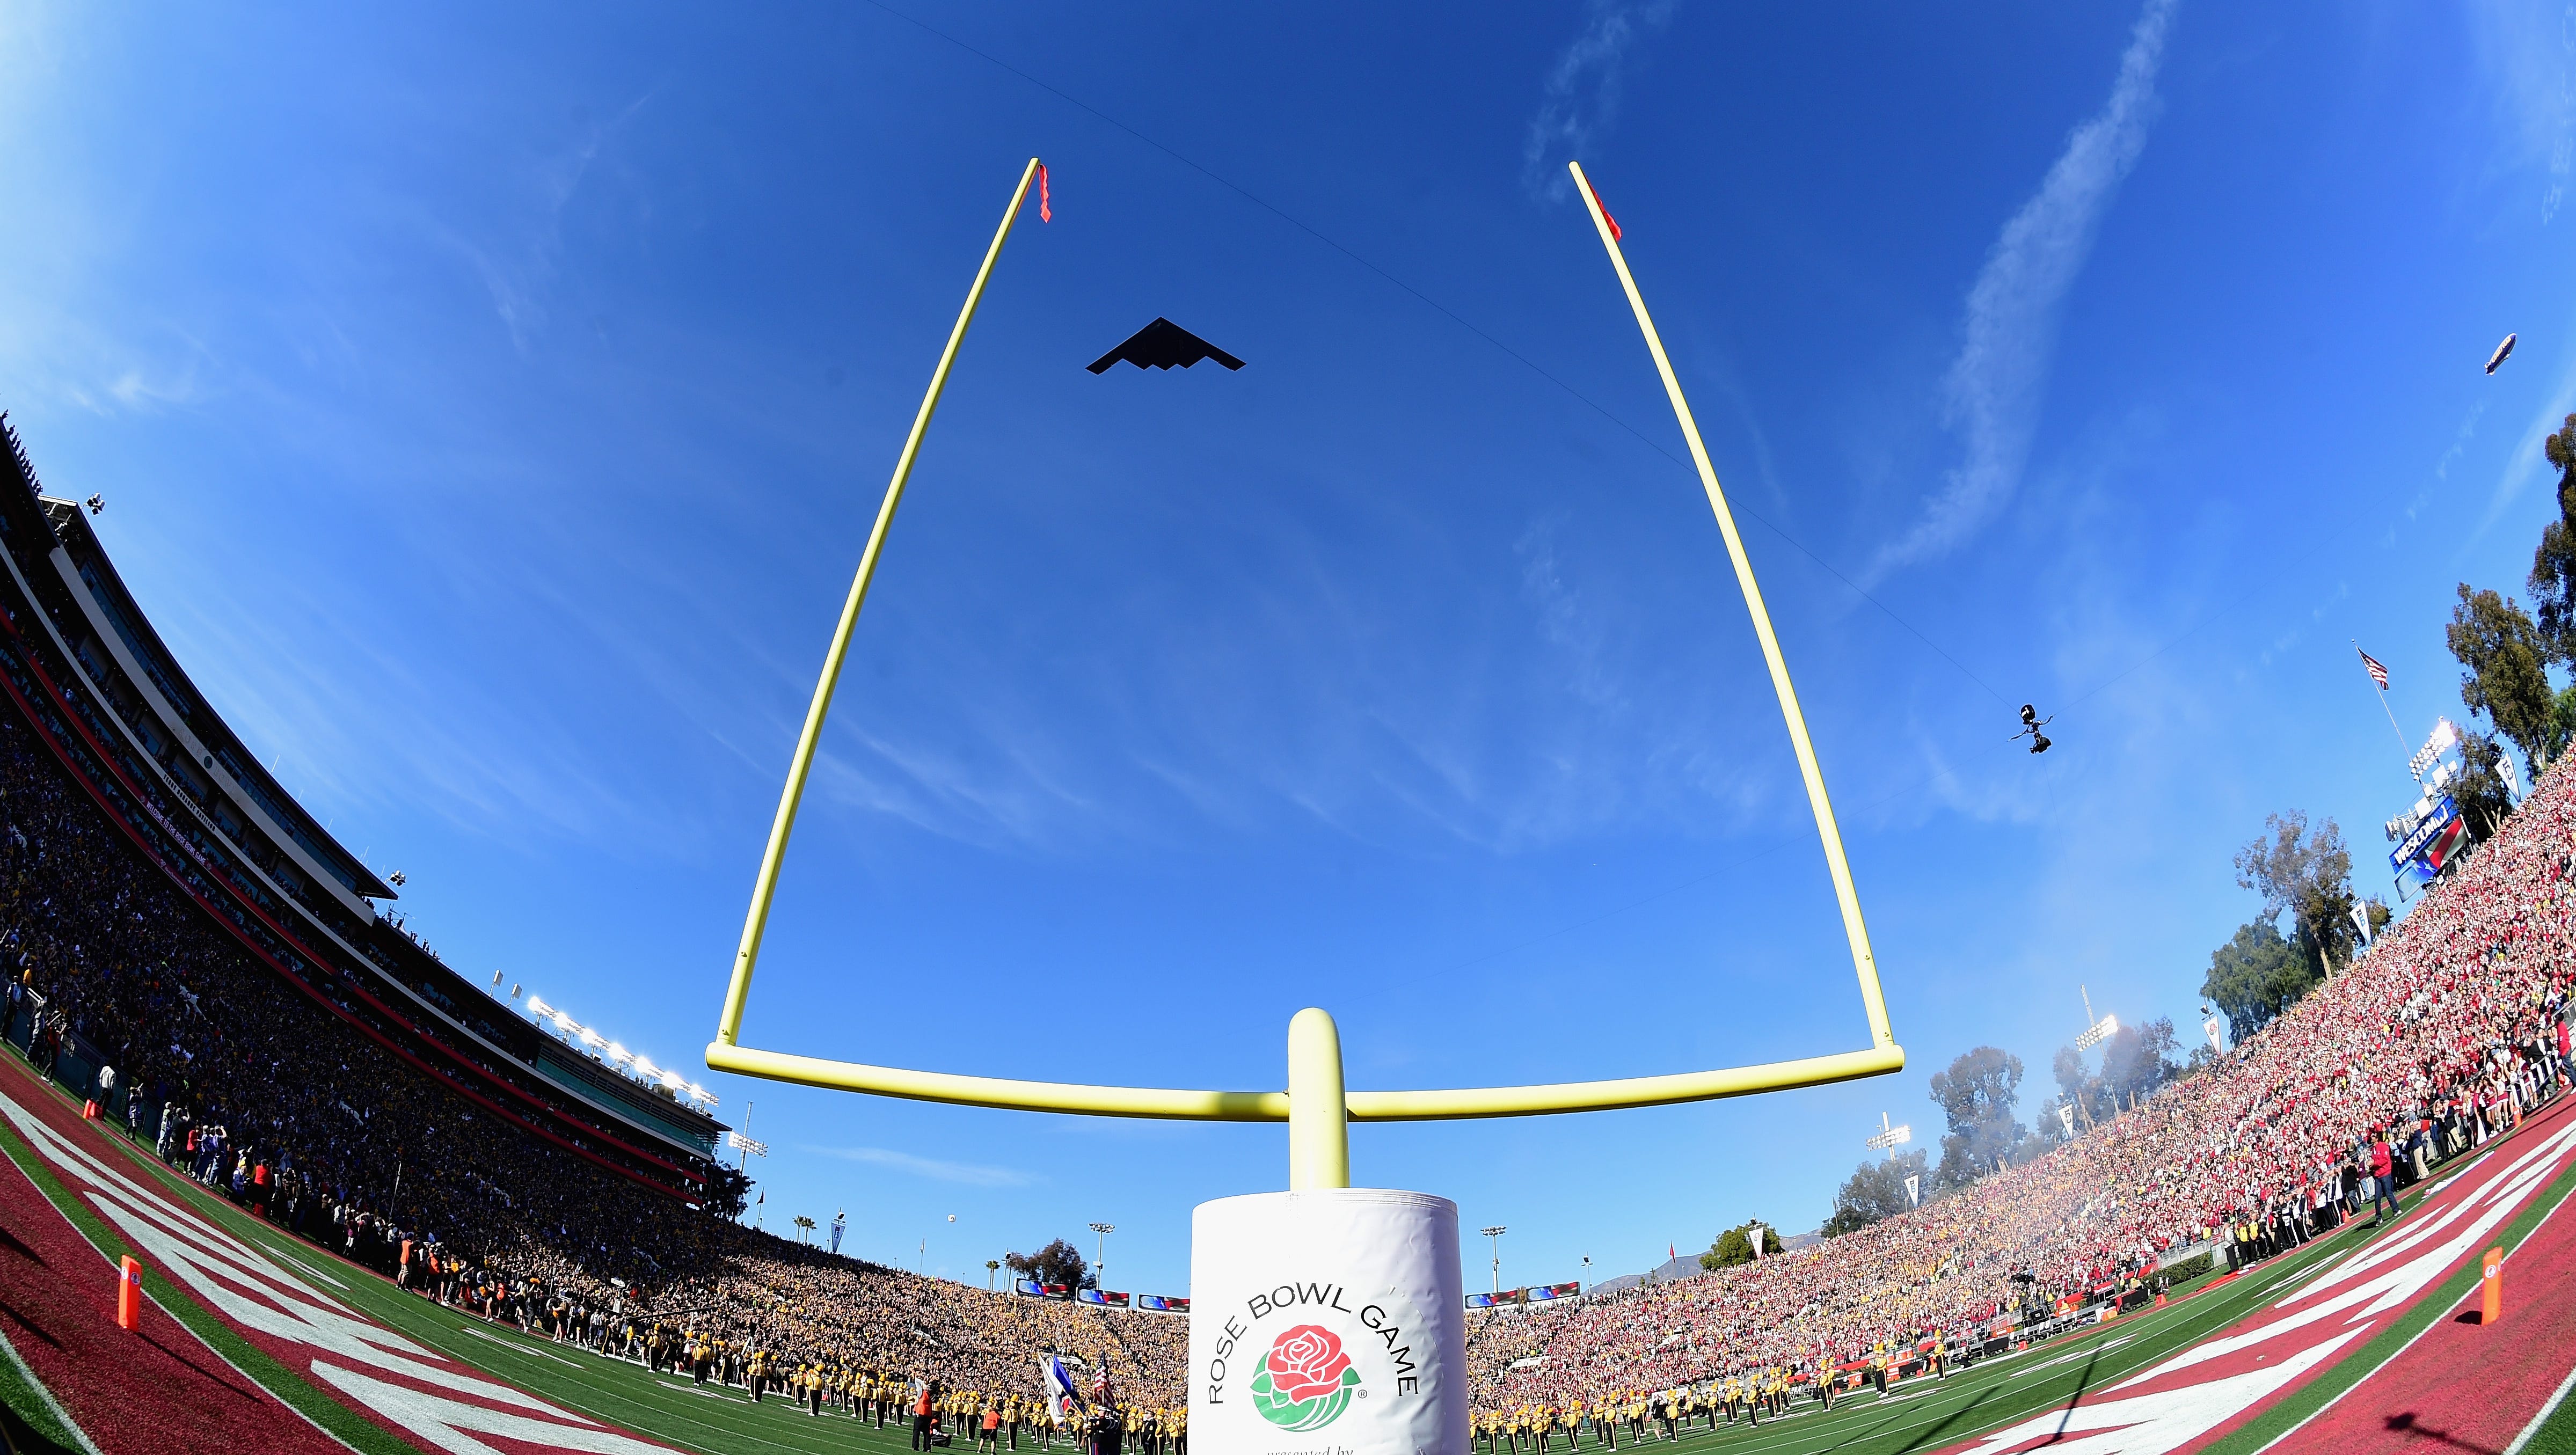 A stealth bomber flies over the stadium before the start of the 102nd Rose Bowl Game between the Iowa Hawkeyes and the Stanford Cardinal on January 1, 2016 at the Rose Bowl in Pasadena, California.